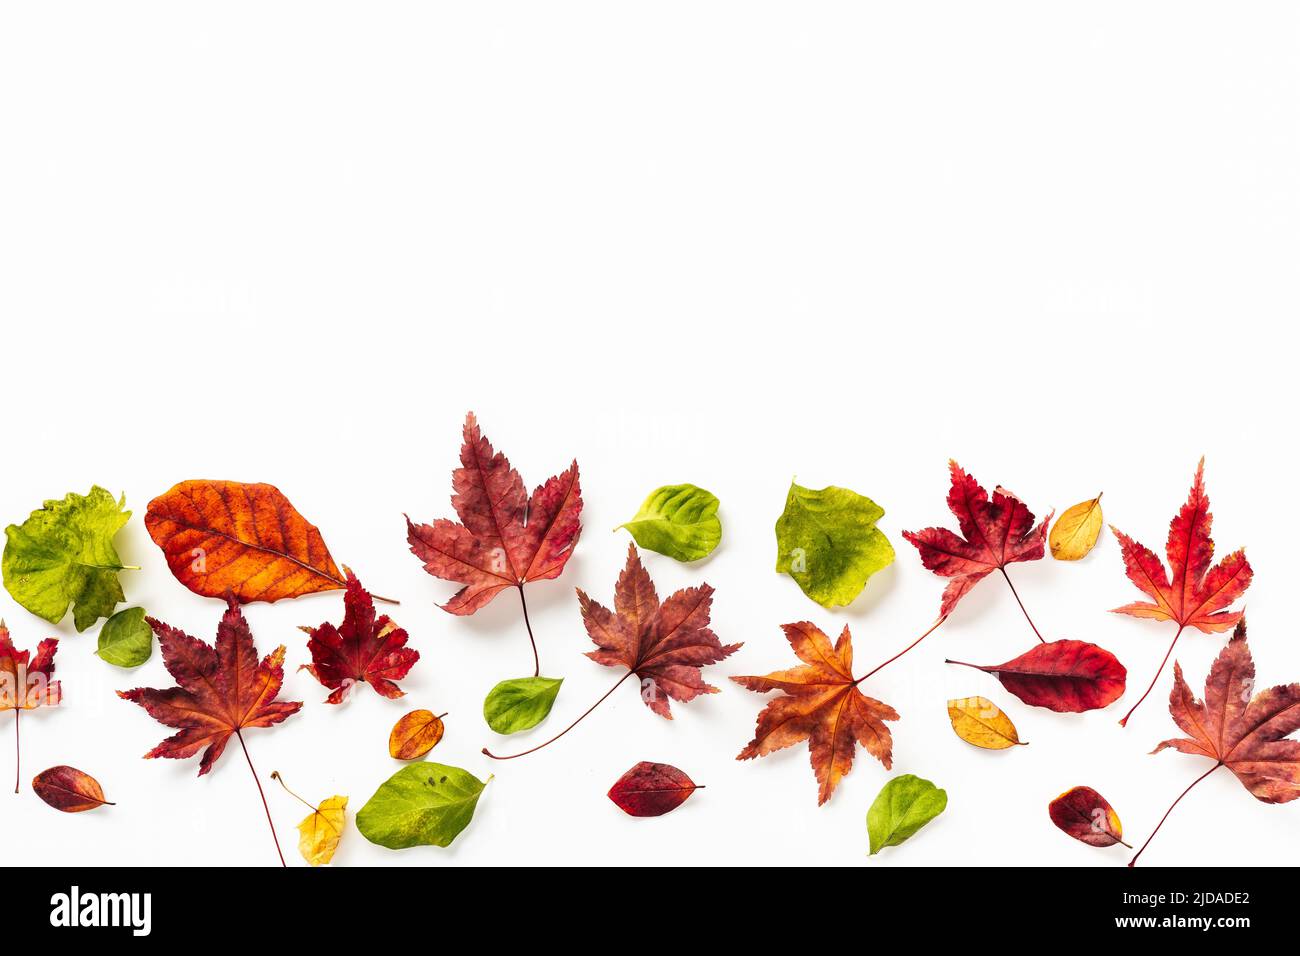 Top view of bright autumn leaves on the bottom of shot. White background Stock Photo